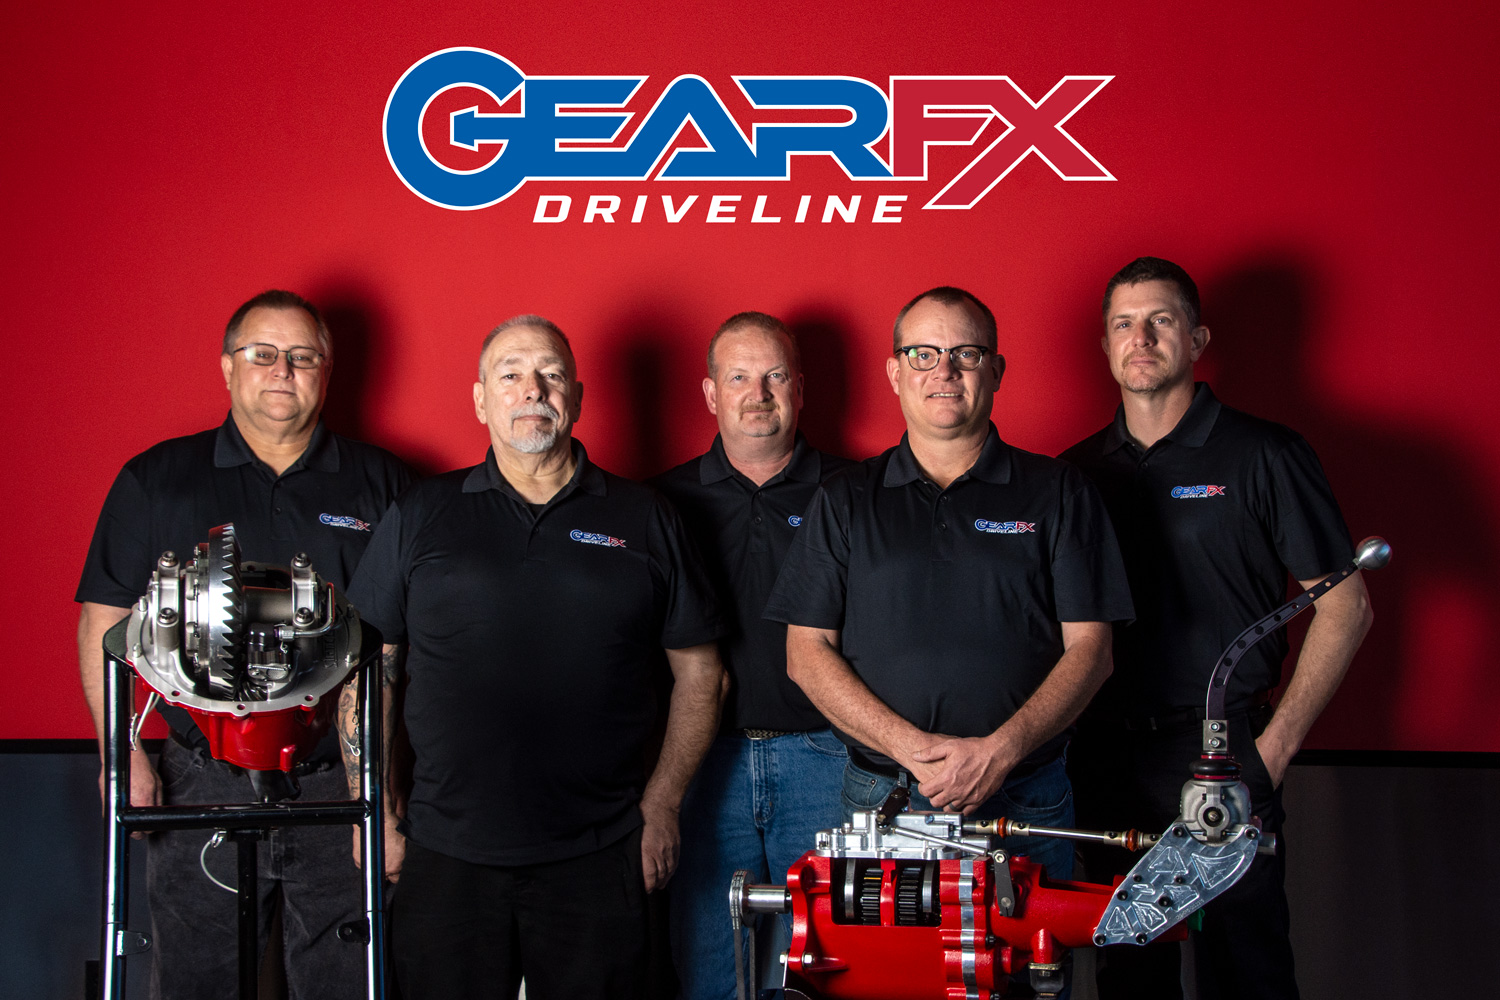 Kyle Tucker of Detroit Speed has acquired the driveline division of C&R Racing (South) and renamed it GearFX Driveline. The new